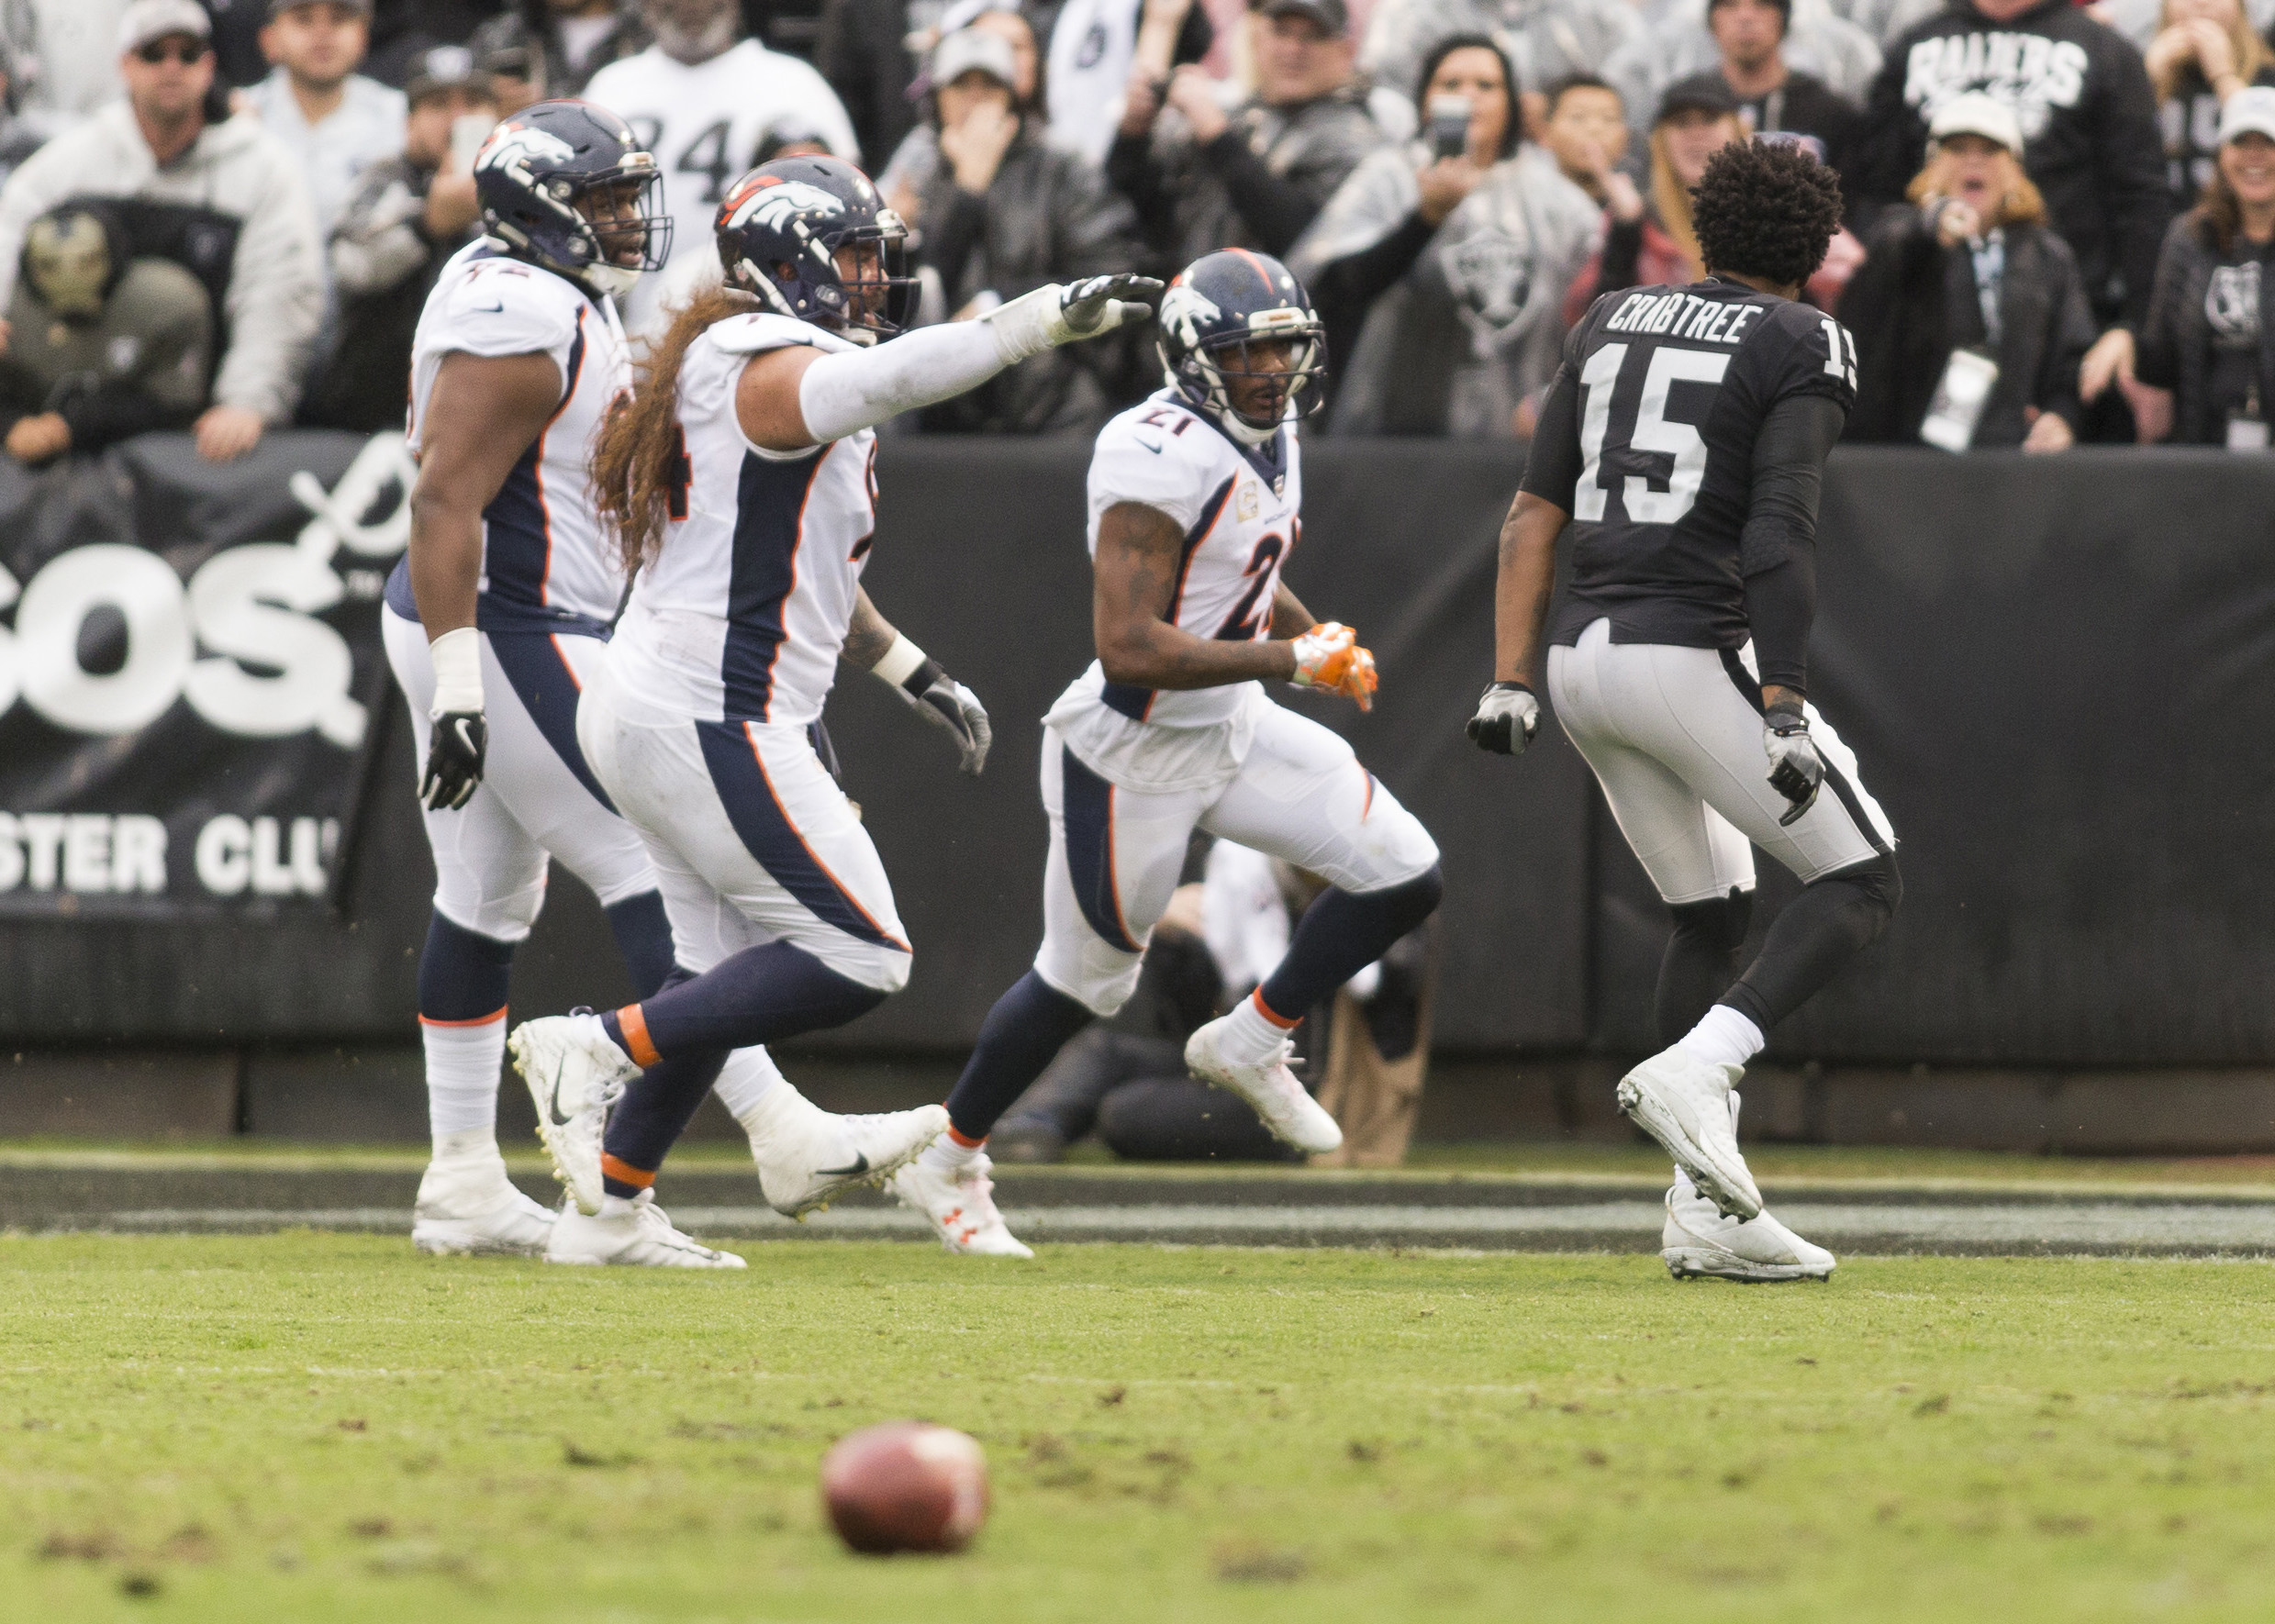 Oakland Raiders wide receiver Michael Crabtree (15) taunts Denver Broncos cornerback Aqib Talib (21) after the incident on the sidelines during the first quarter at Oakland Coliseum.